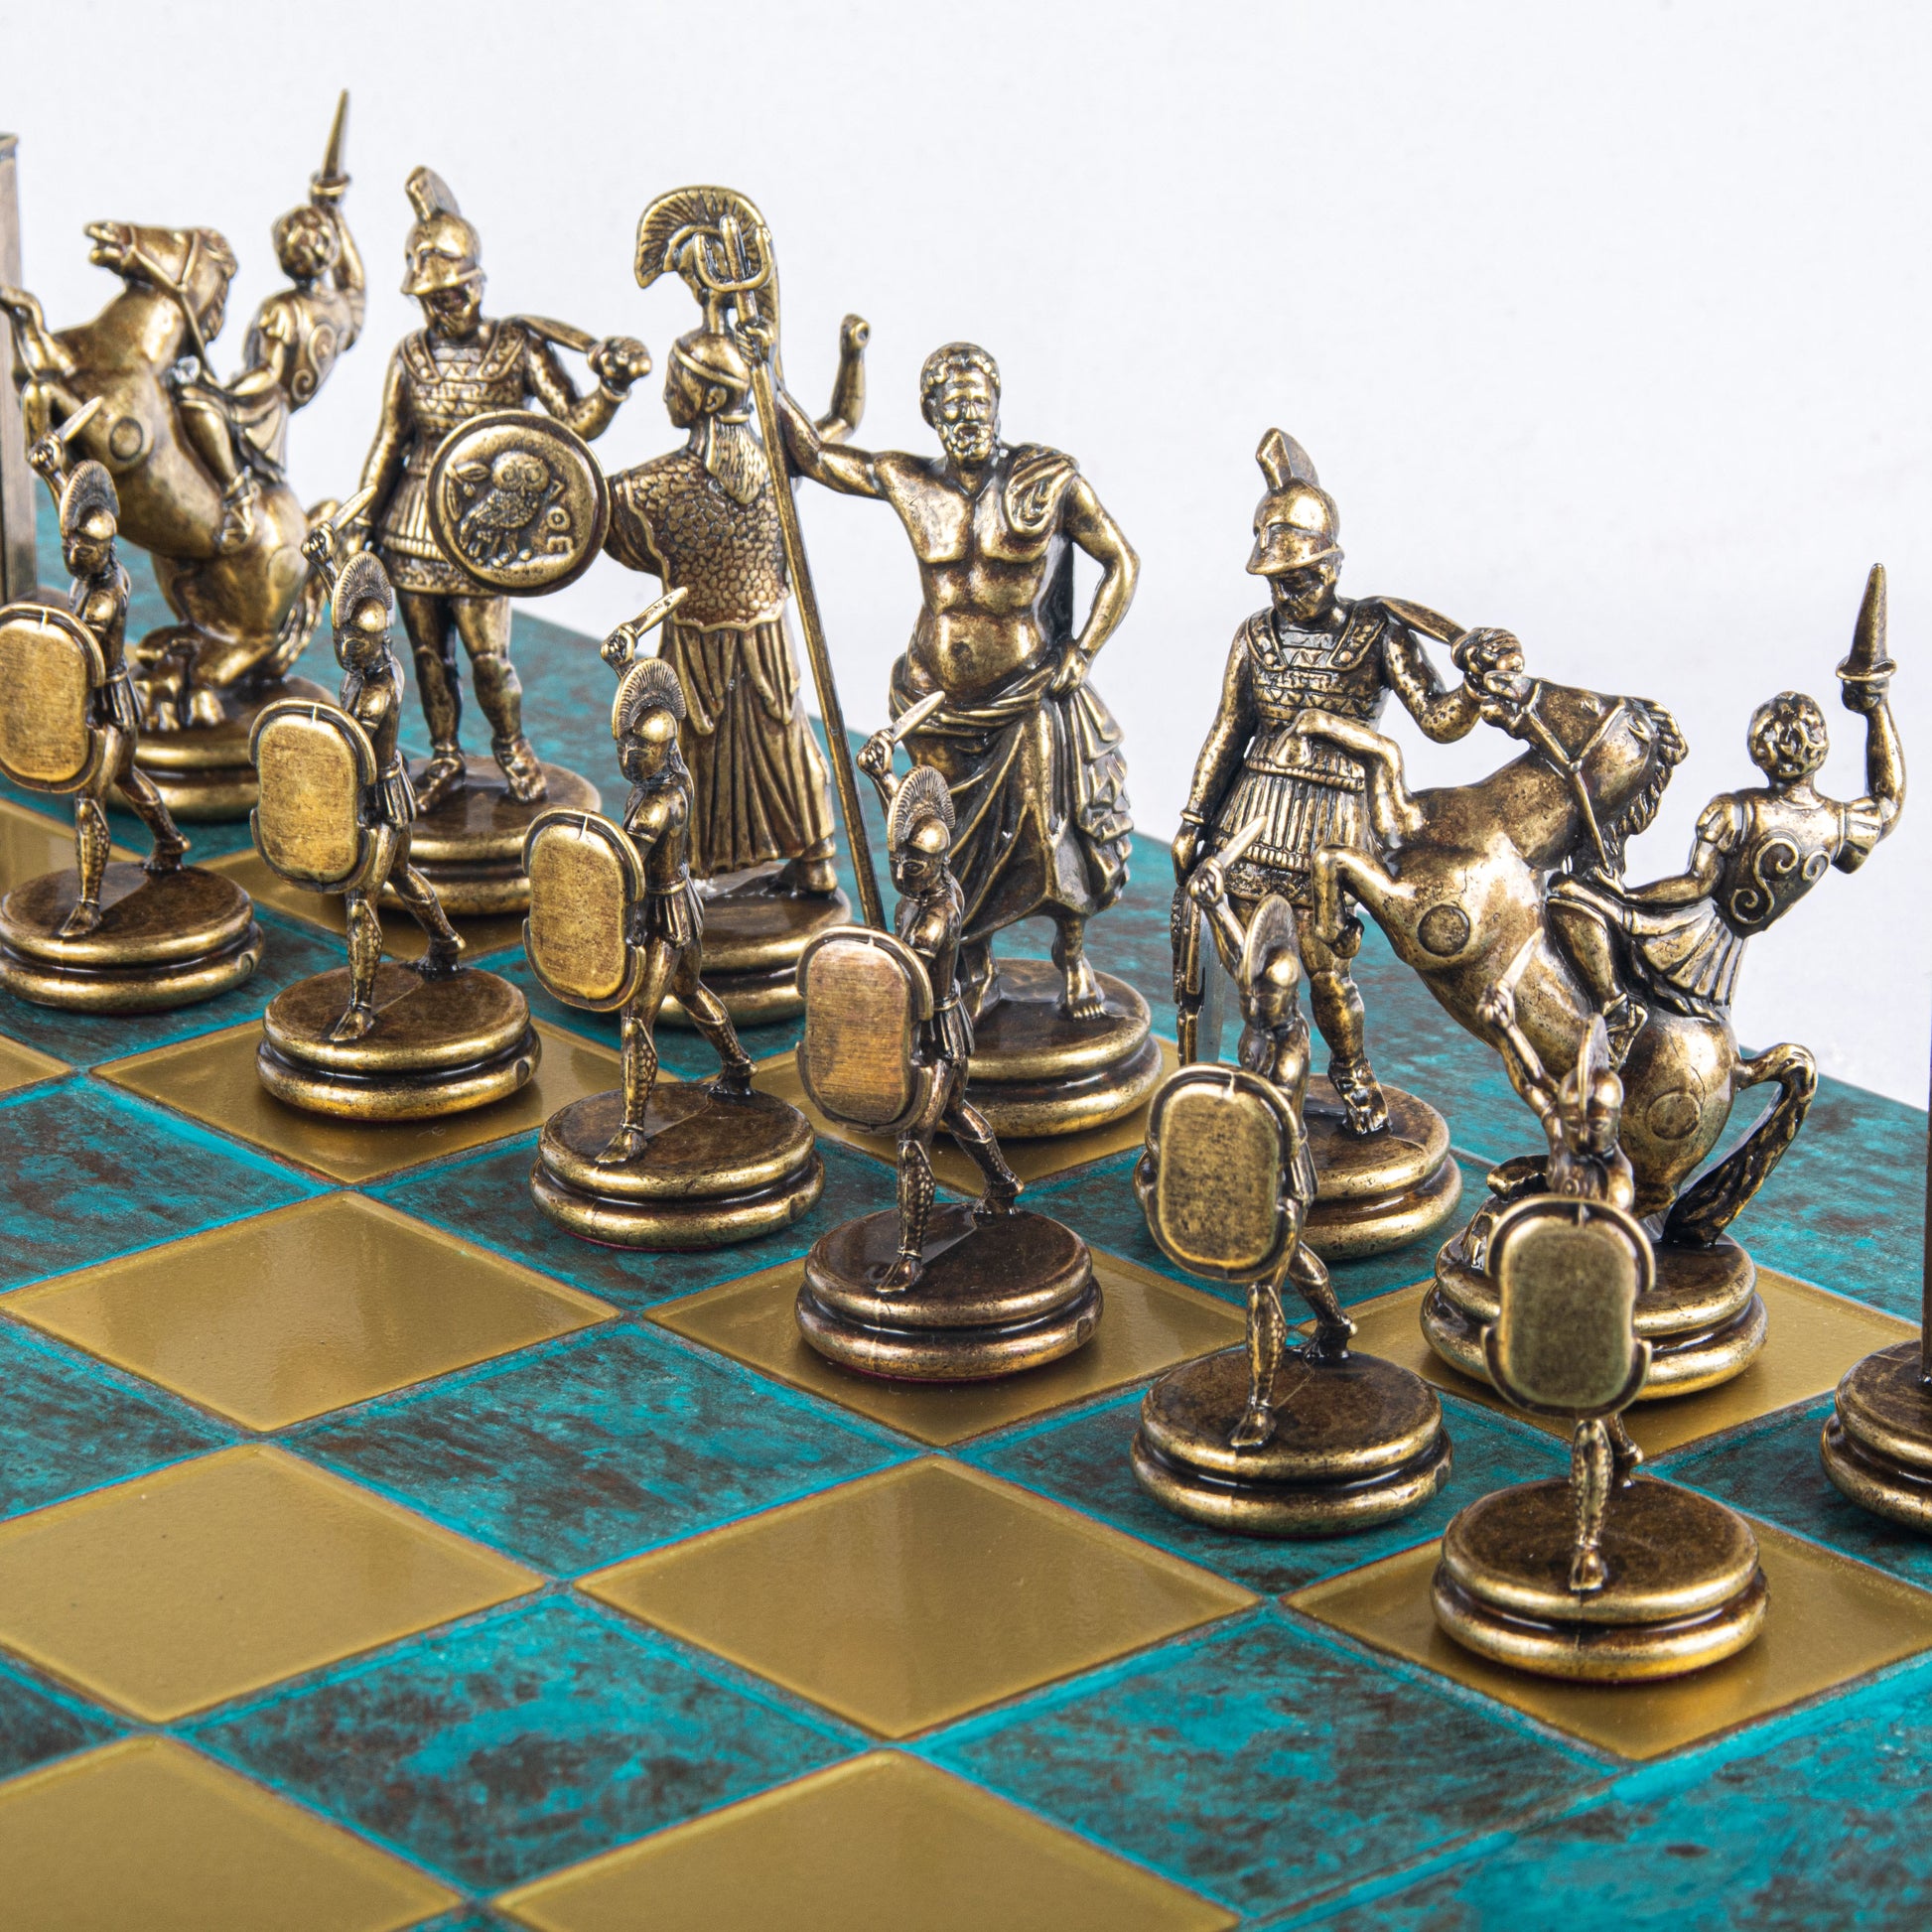 GREEK MYTHOLOGY CHESS SET with blue/brown chessmen and bronze chessboard 54 x 54cm (Extra Large) - Premium Chess from MANOPOULOS Chess & Backgammon - Just €585! Shop now at MANOPOULOS Chess & Backgammon